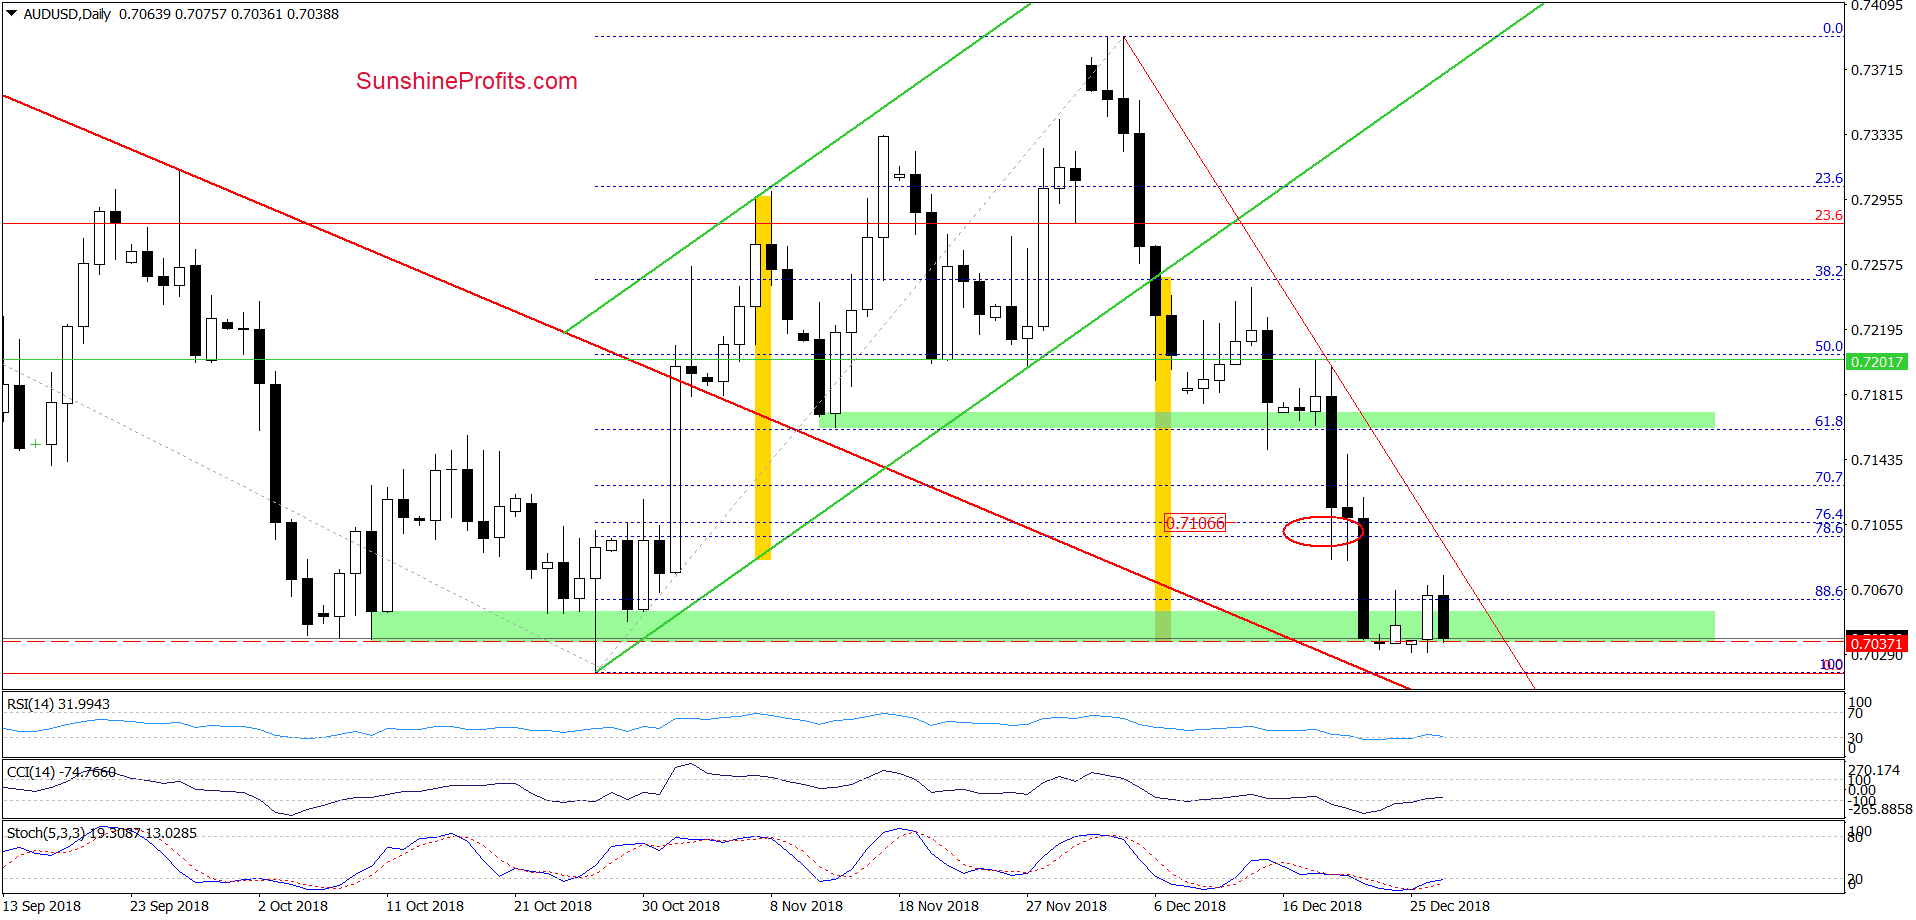 AUD/USD - daily chart